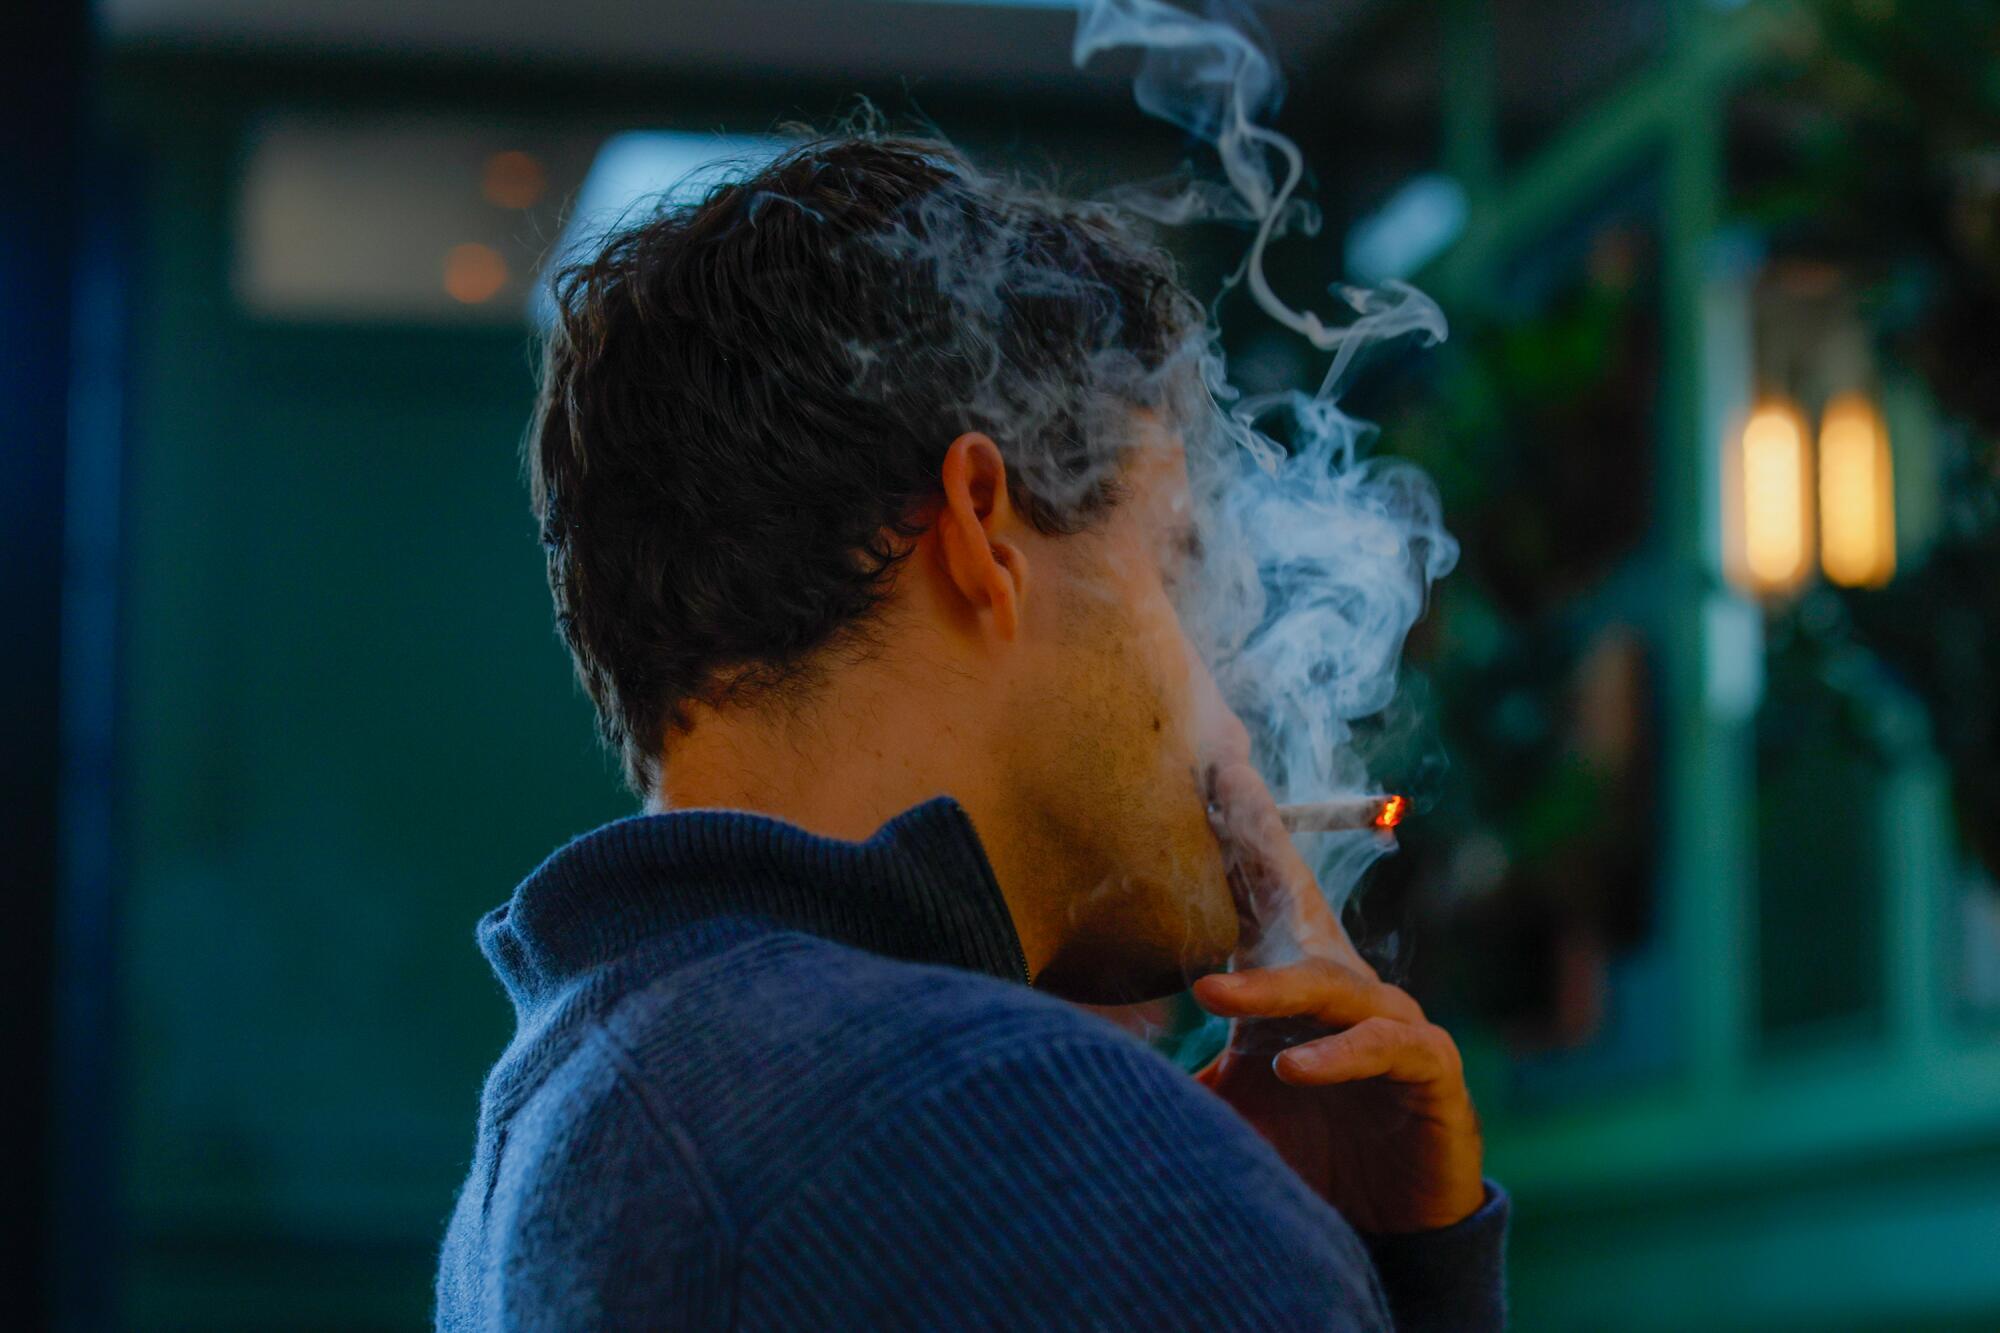 A side profile view of a man taking a drag from his joint, smoke obscuring his face.